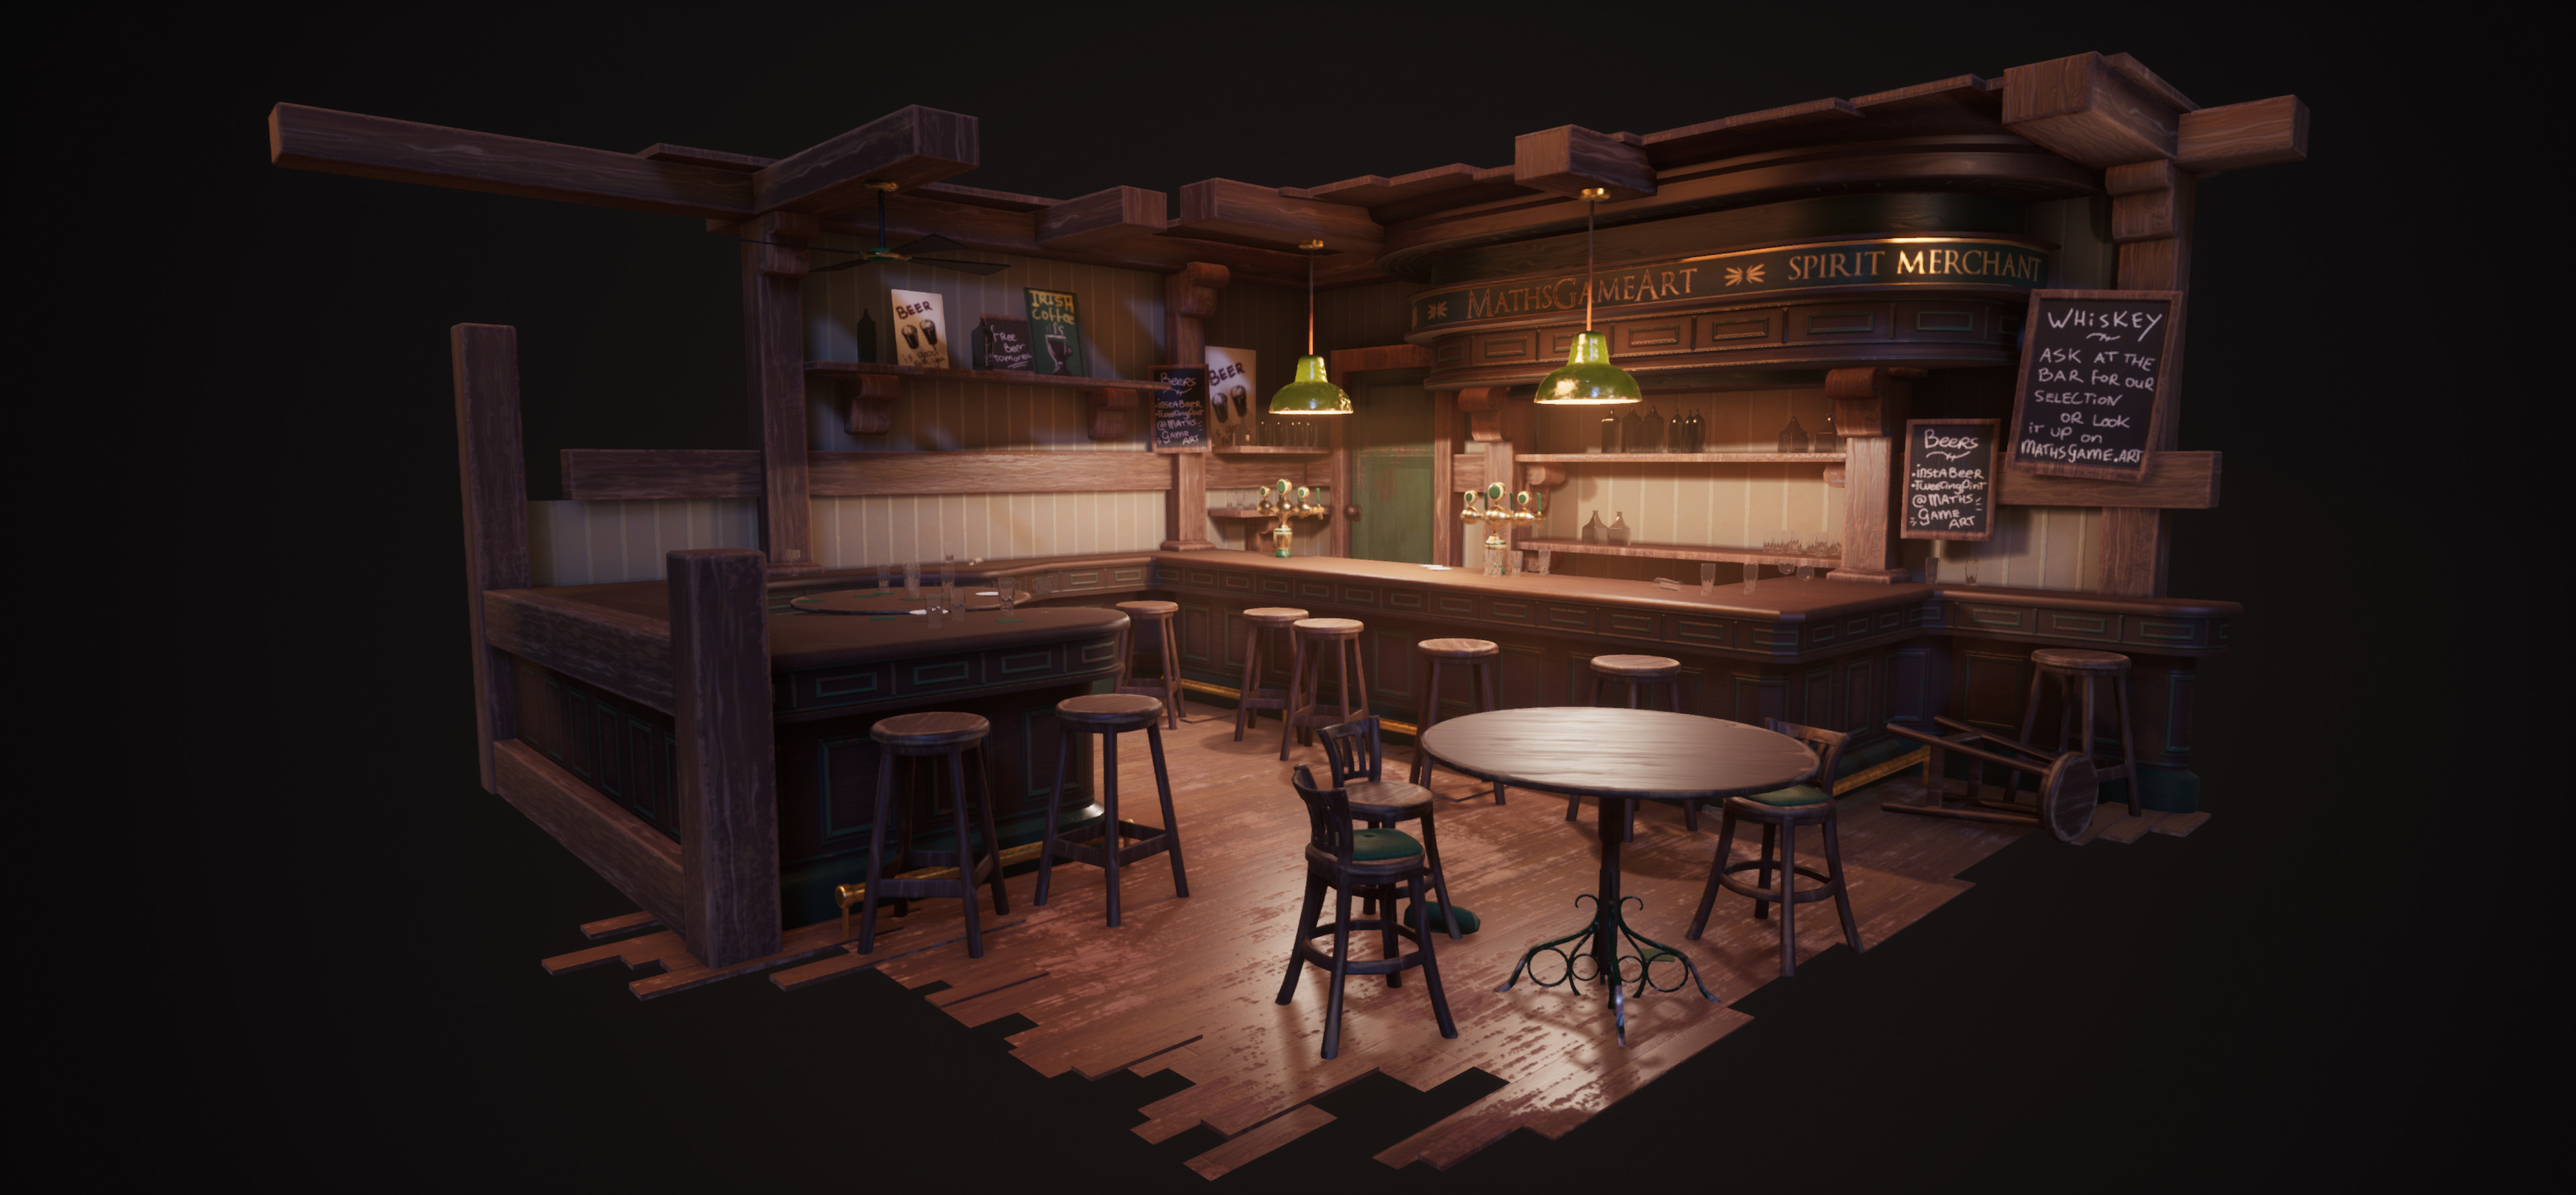 Overview of the entire composition in UE4. The volumetric lights really give that hazy/smokey pub feel and helps a lot to get the right atmosphere.